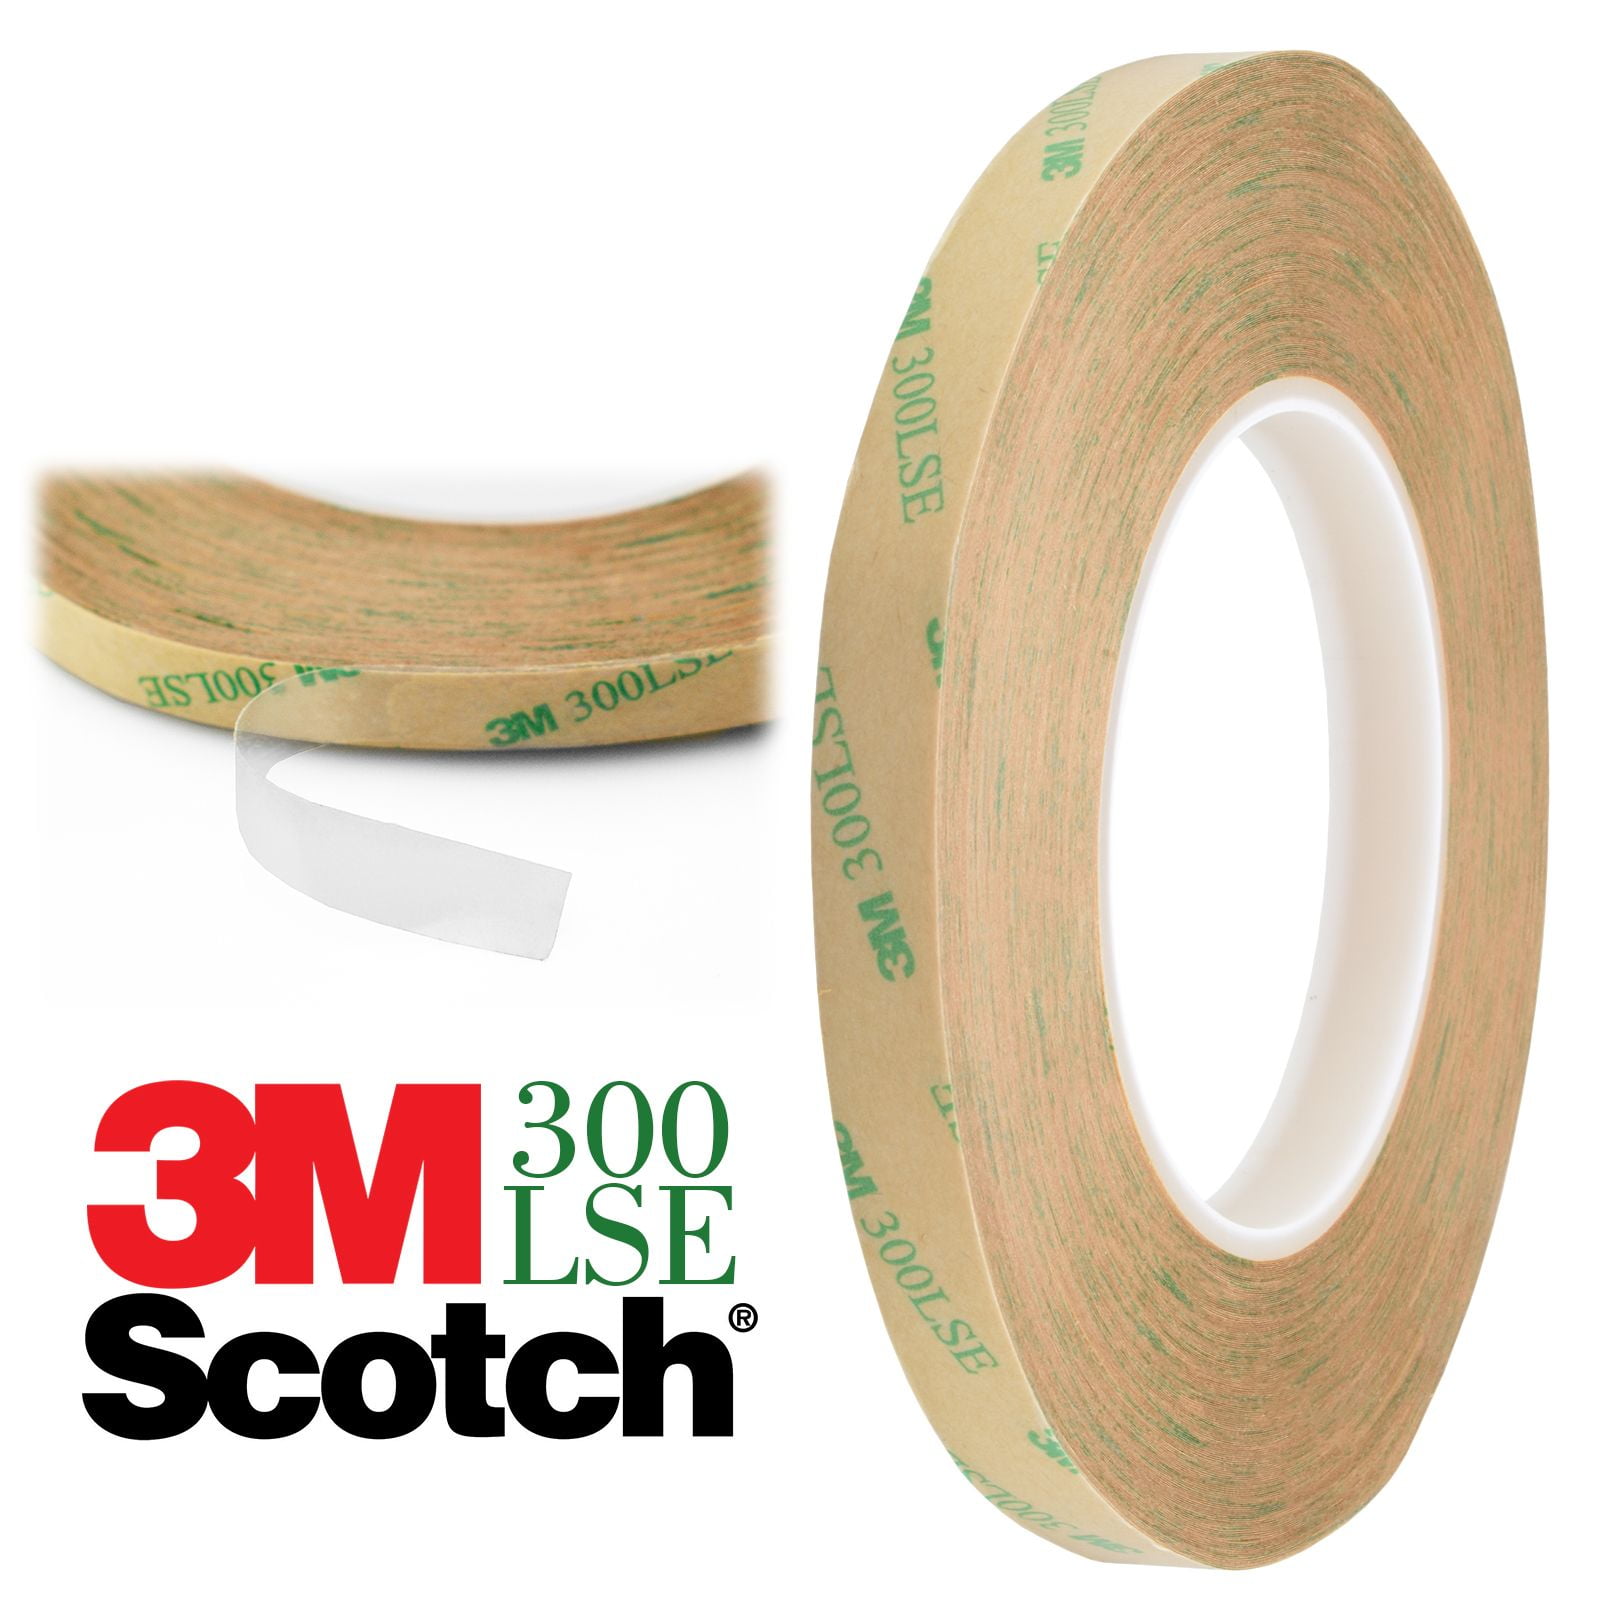 Genuine 3M 300LSE 2 MM Double Sided Tape Heavy Duty Cell Phone Repair 180  Feet Long Roll